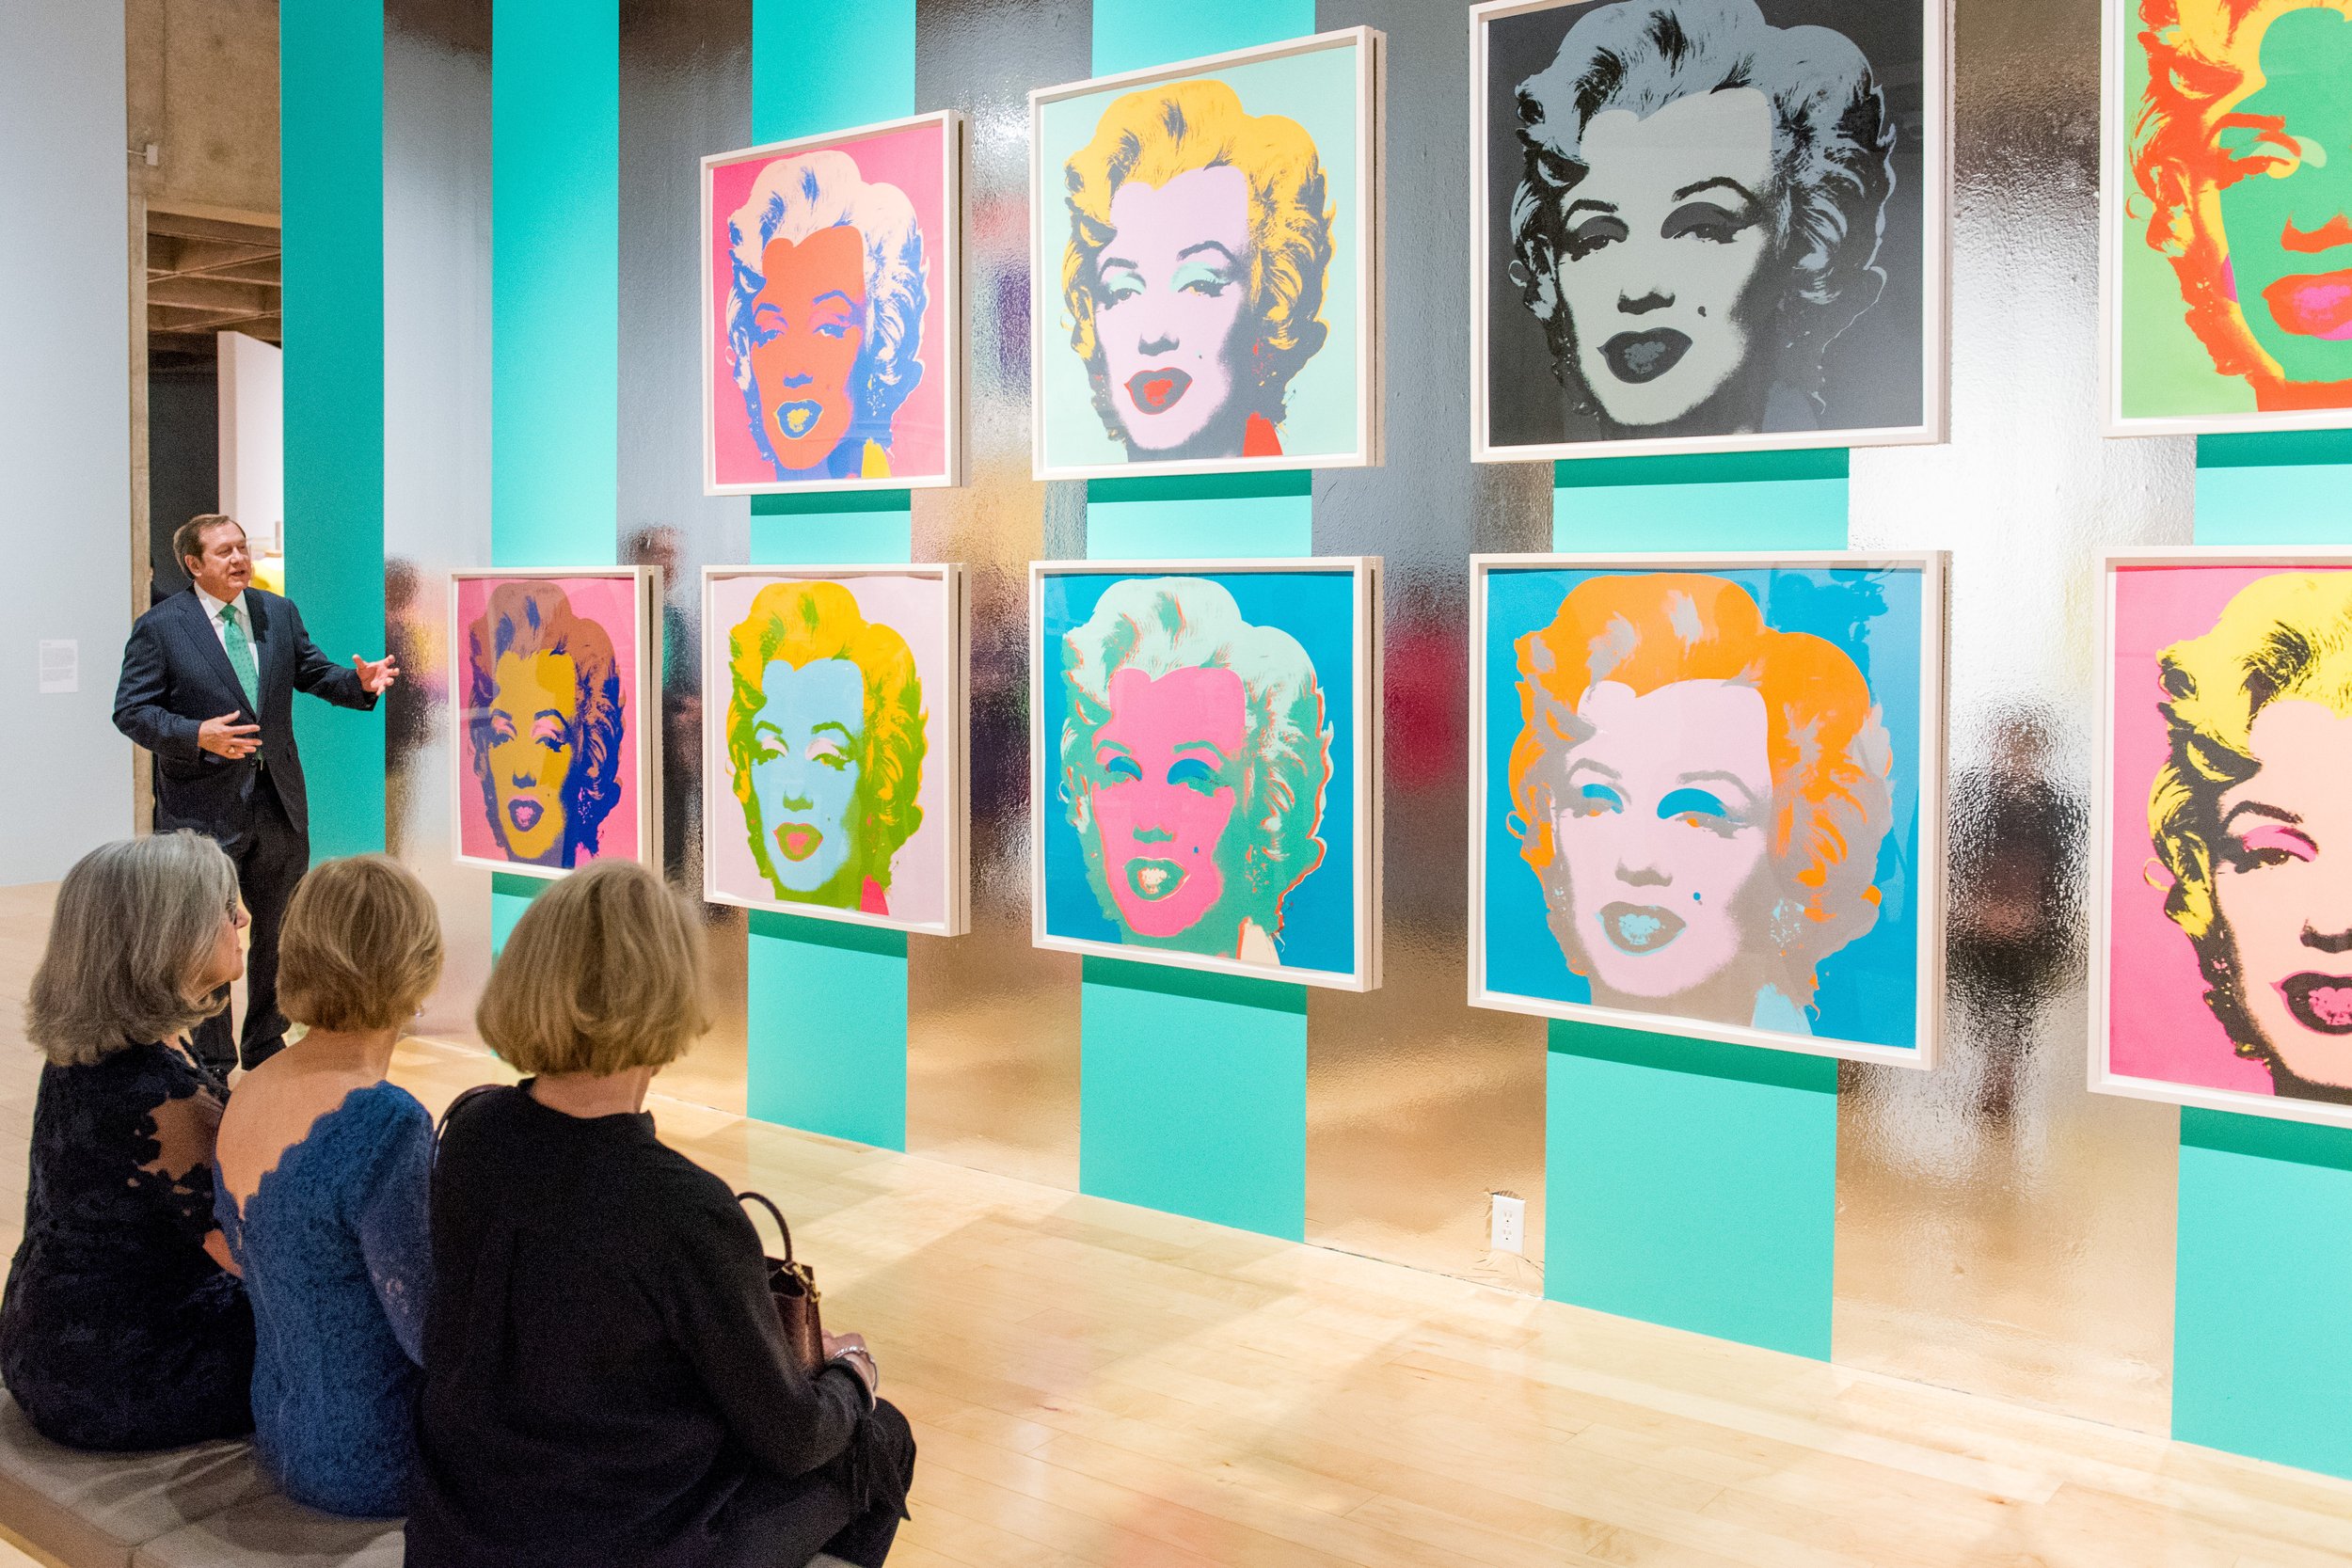  Schnitzer discussing Andy Warhol’s  Marilyn Monroe  series (1967) during  Andy Warhol: Prints from the Collections of Jordan D. Schnitzer and His Family Foundation  at the Palm Springs Art Museum.   Photo courtesy Jordan Schnitzer Family Foundation 